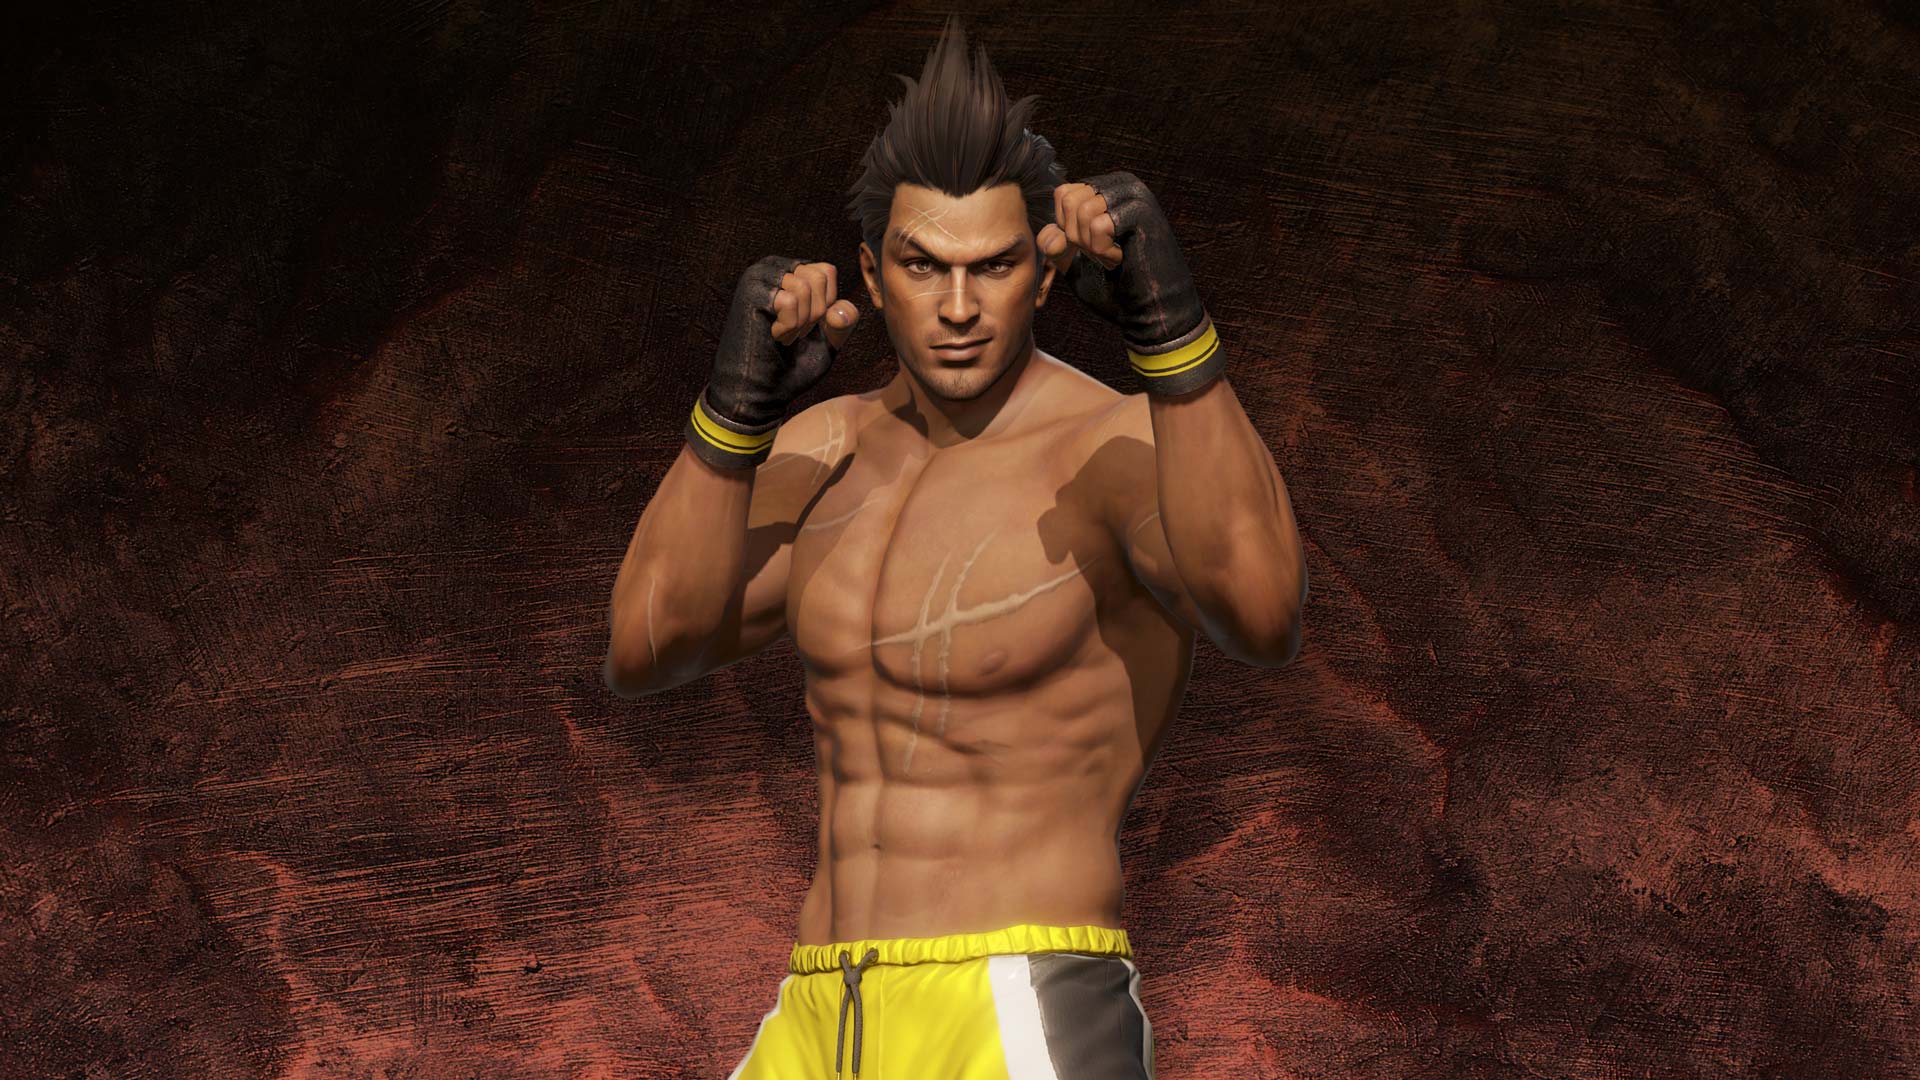  Diego (Dead Or Alive) Windows Backgrounds